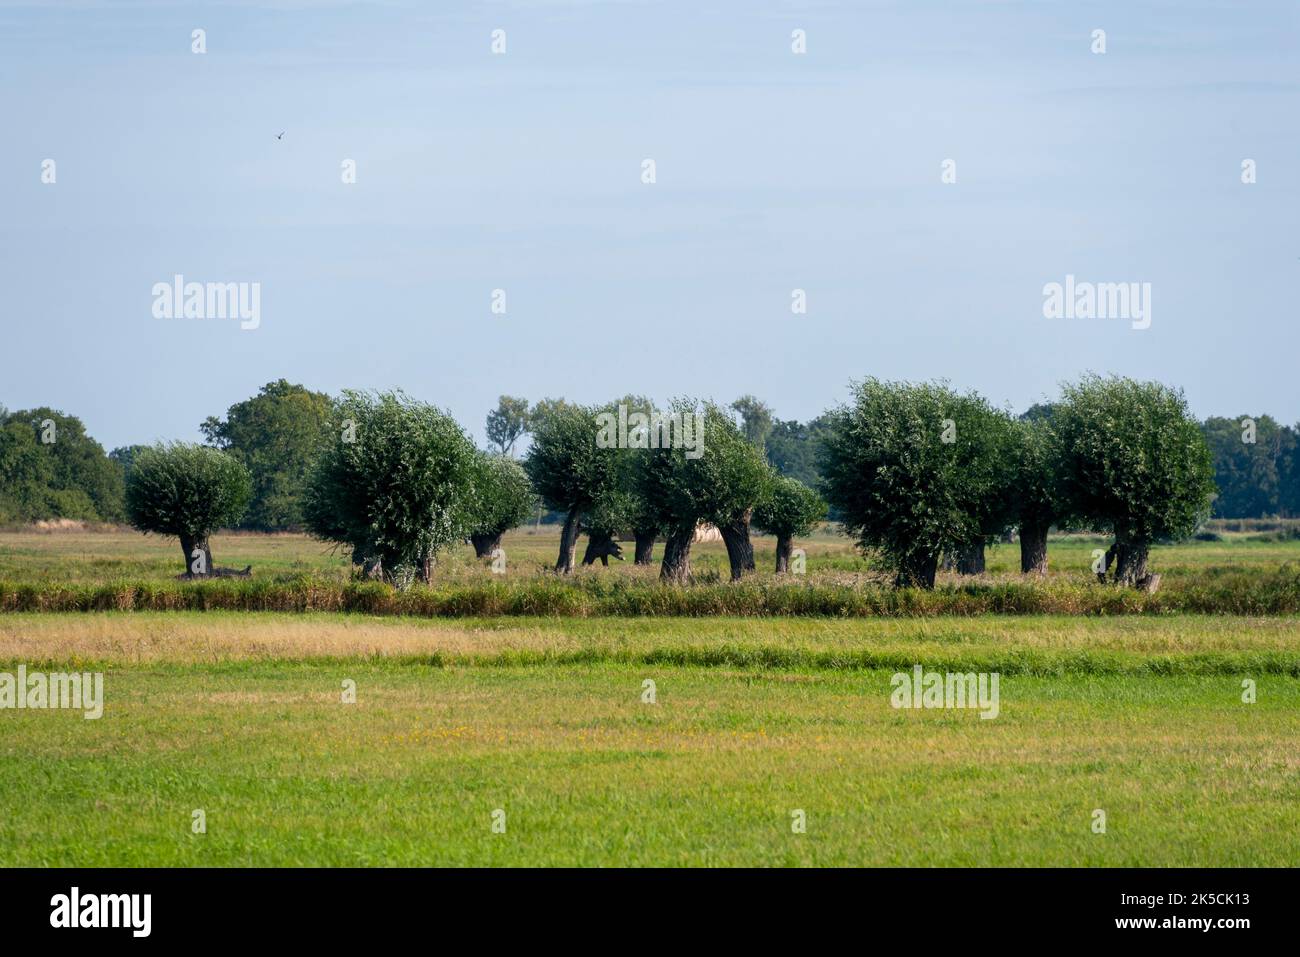 Silver willows, Havel lowland, Kuhlhausen, Saxony-Anhalt, Germany Stock Photo